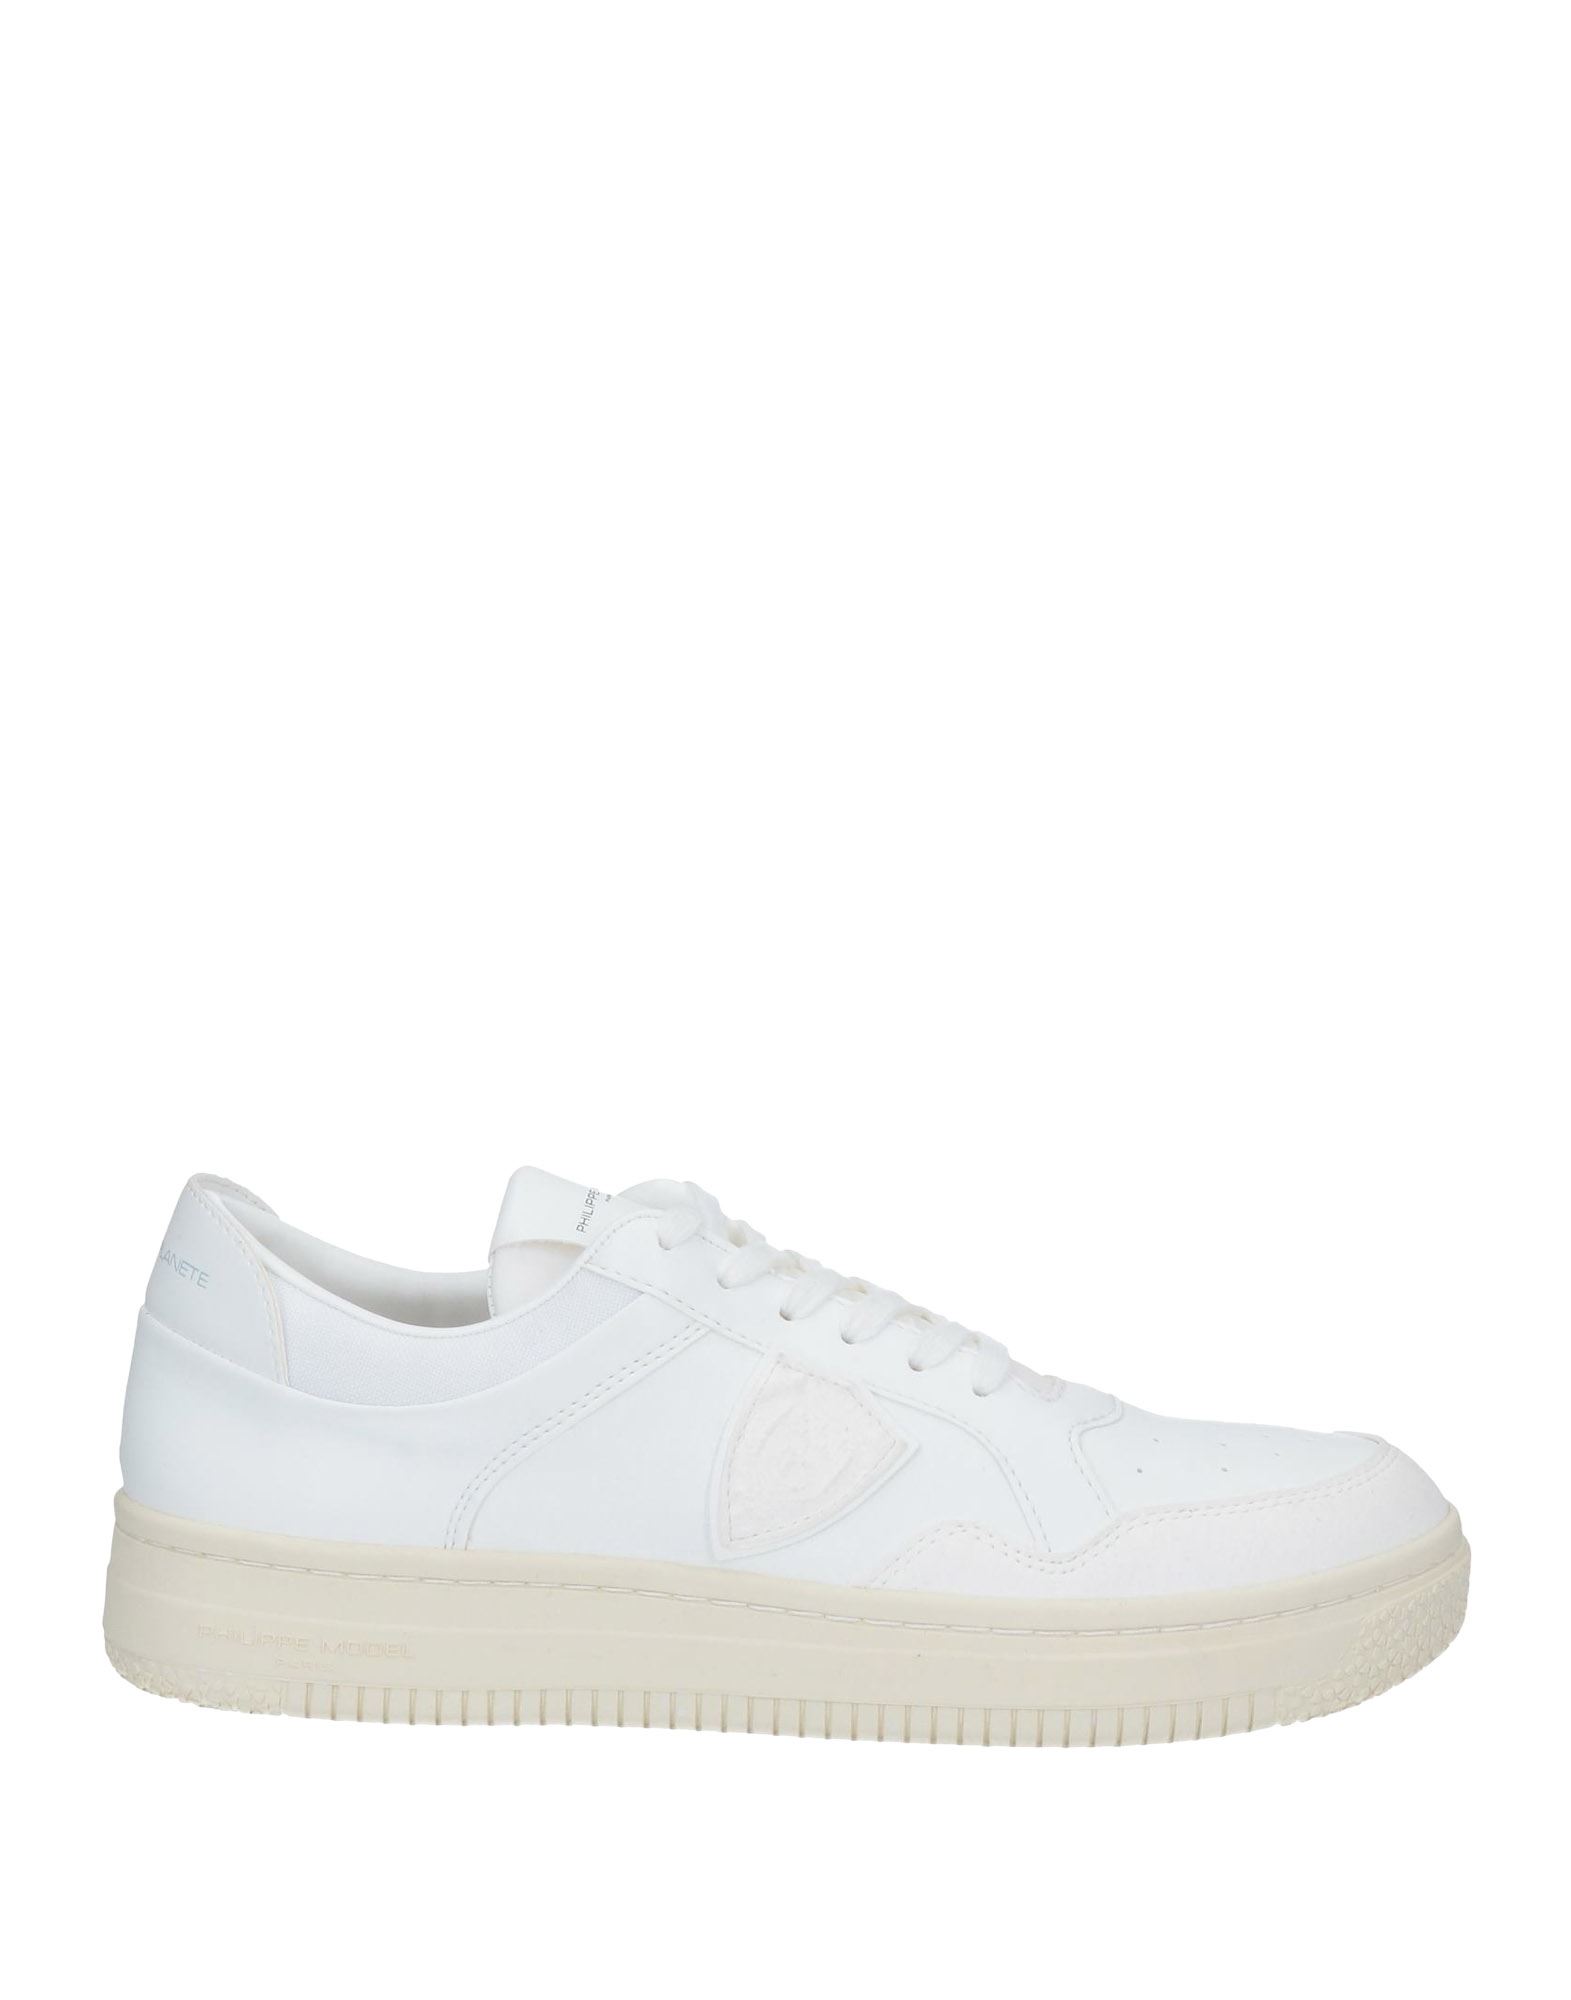 Acbc X Philippe Model Sneakers In White